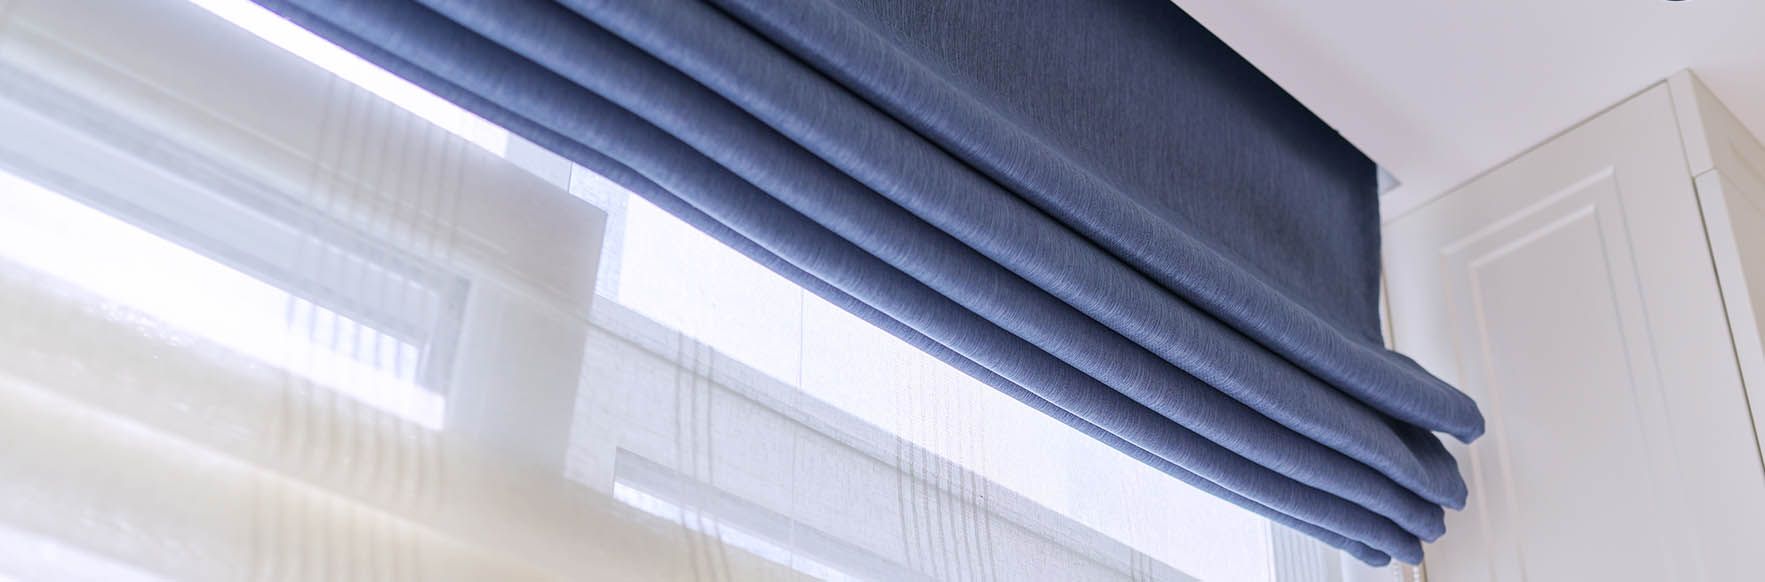 Roman Blinds - Learn more